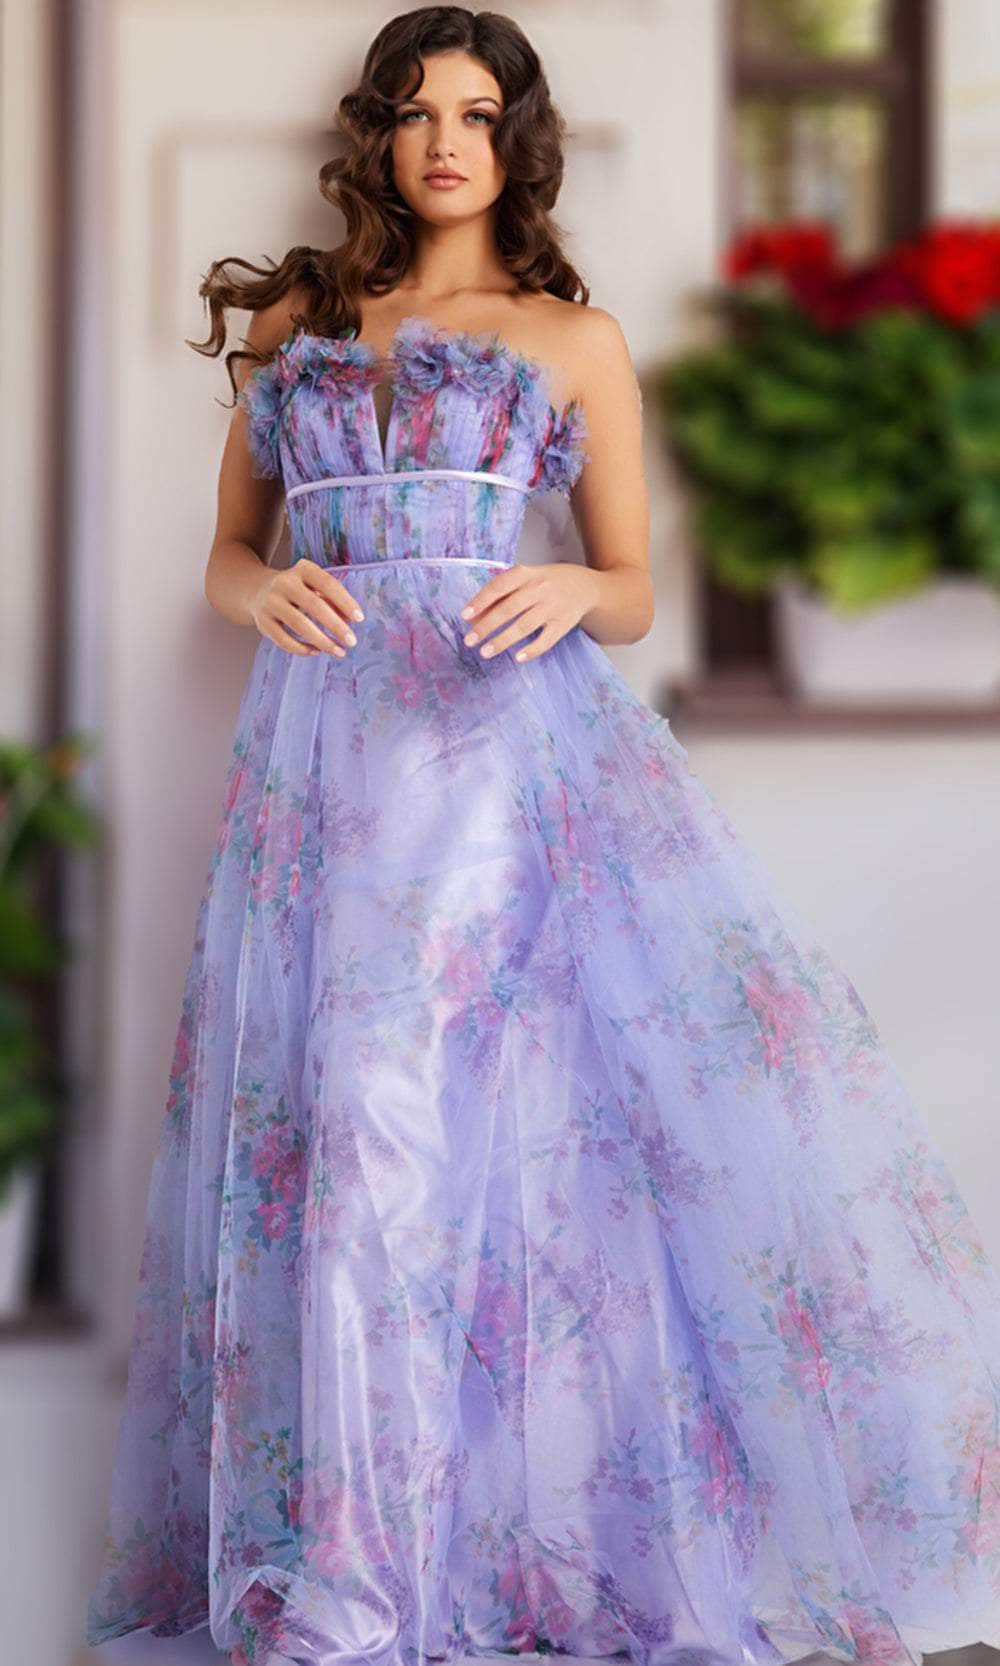 Image of Jovani 39151 - Floral Print Empire Gown